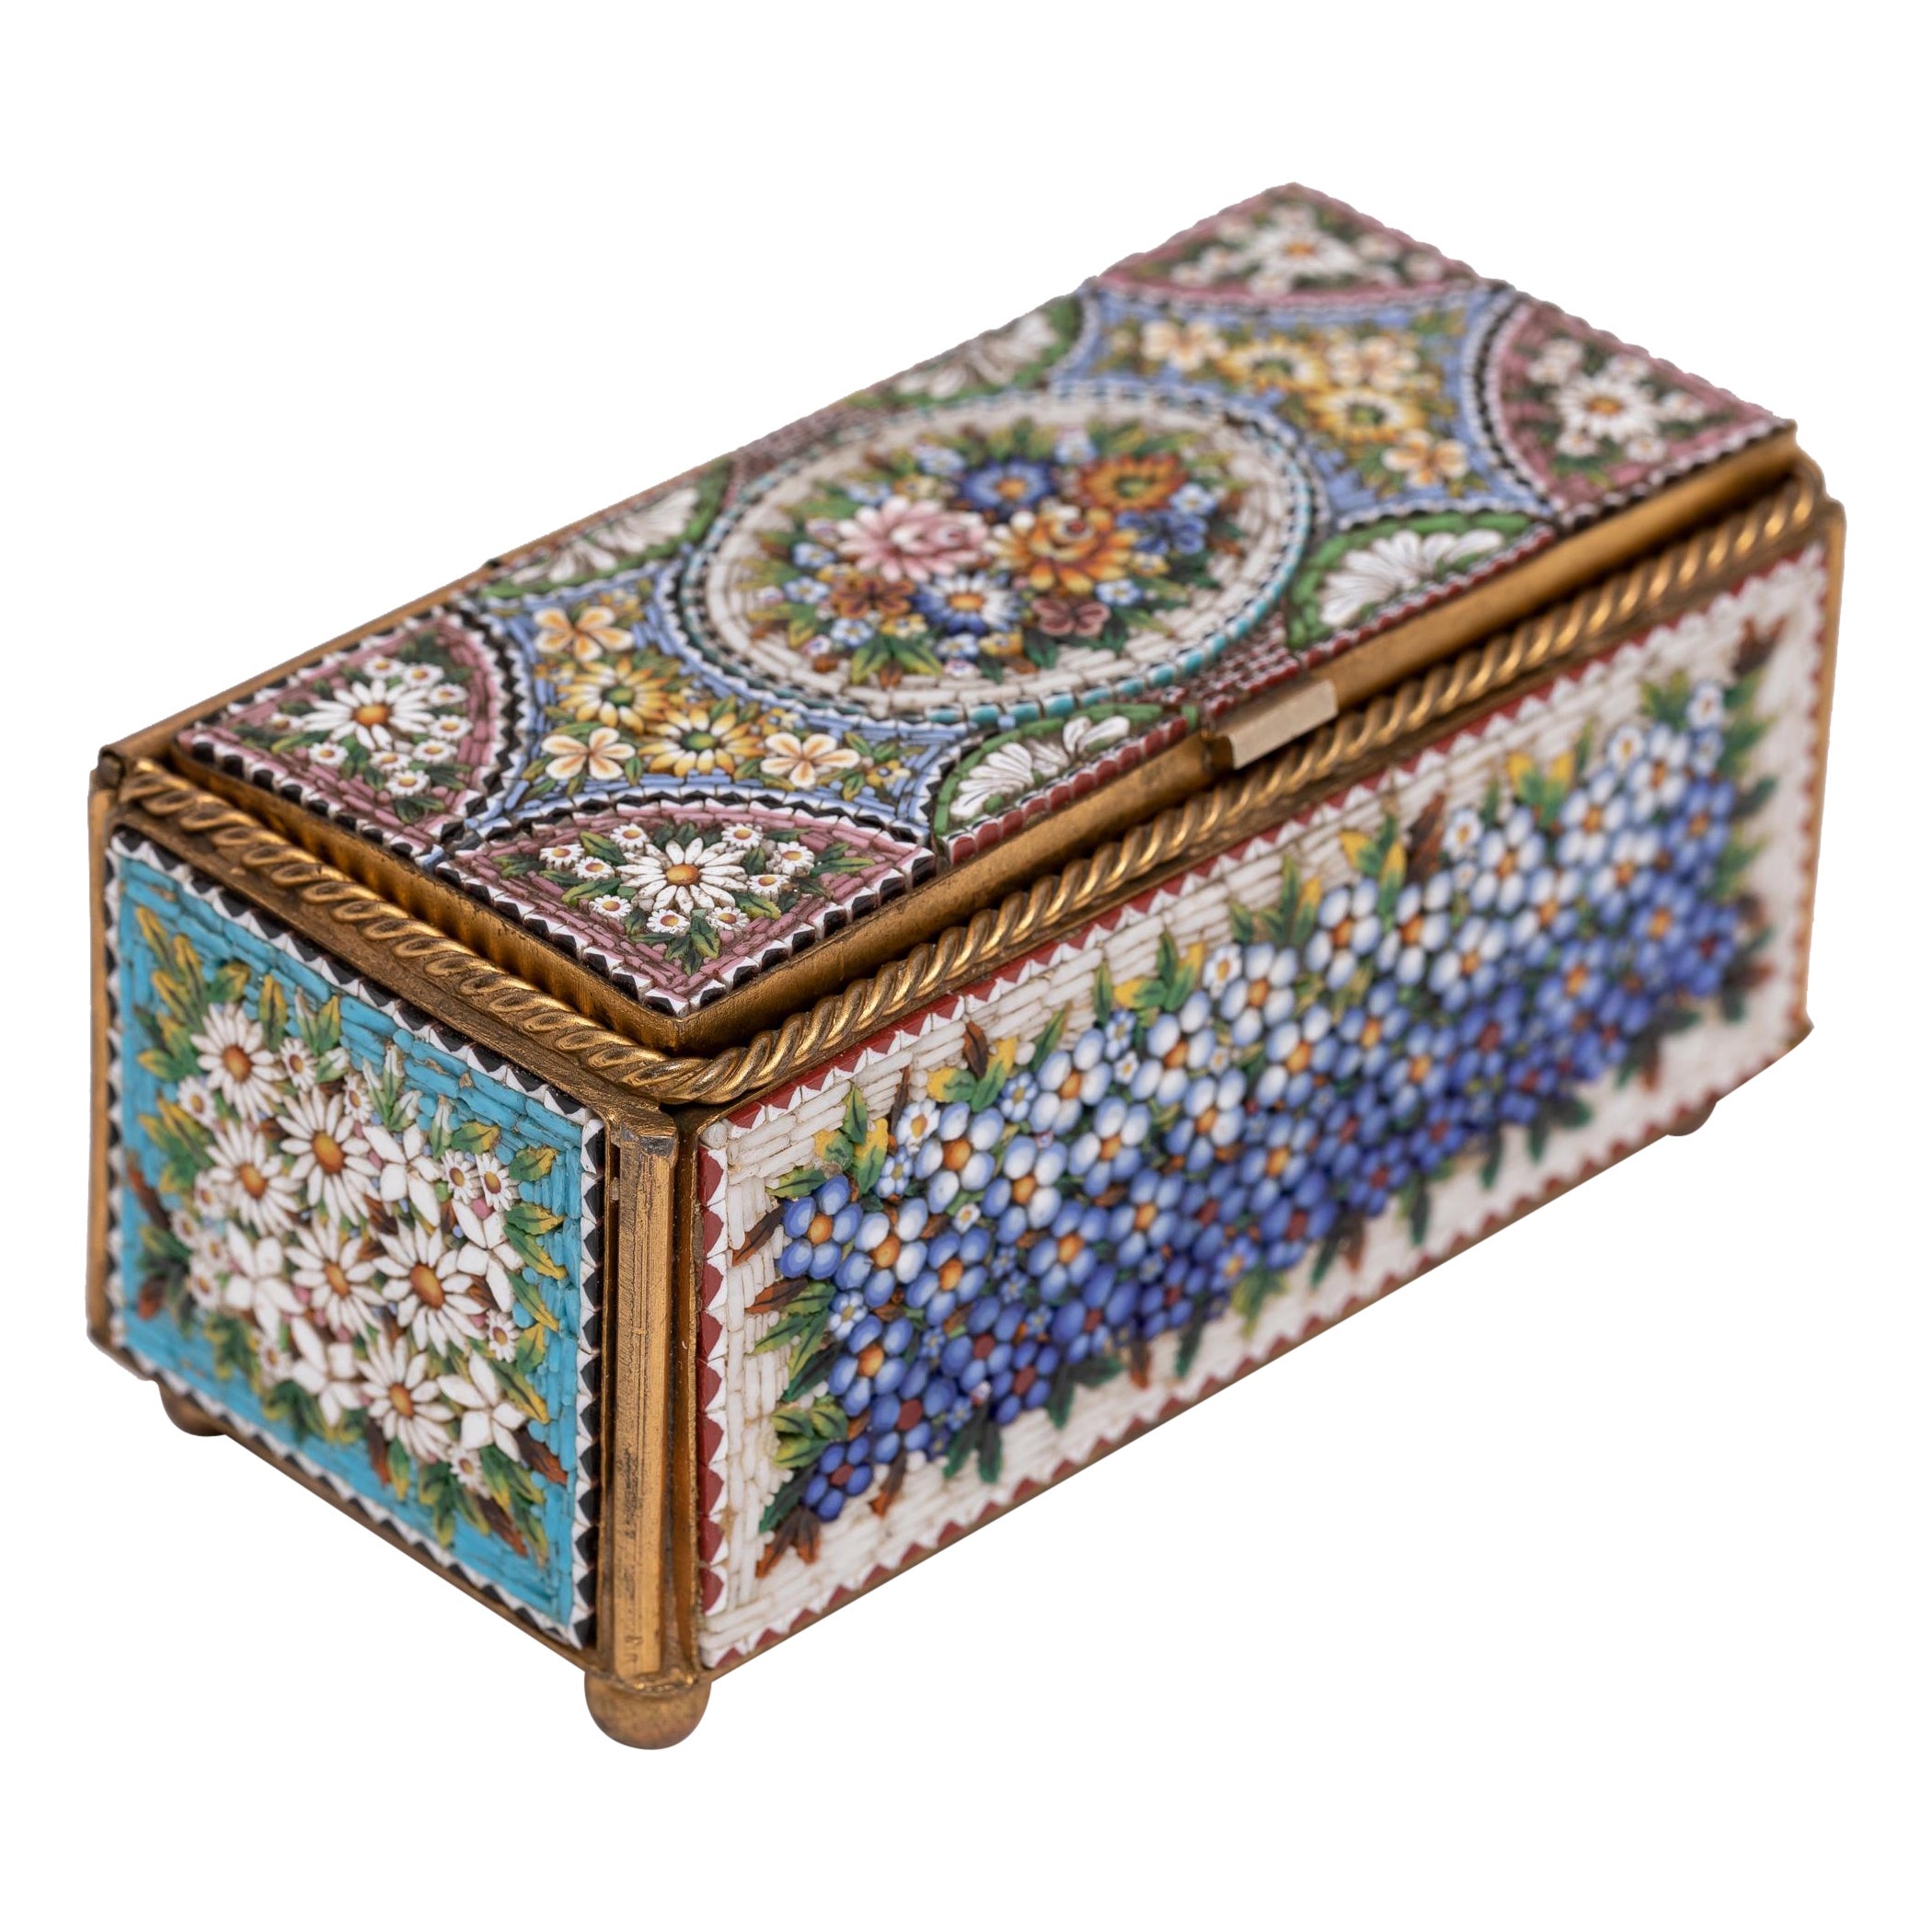 An Antique 19th C. Italian Micro Mosaic Floral Motif Jewelry Box For Sale